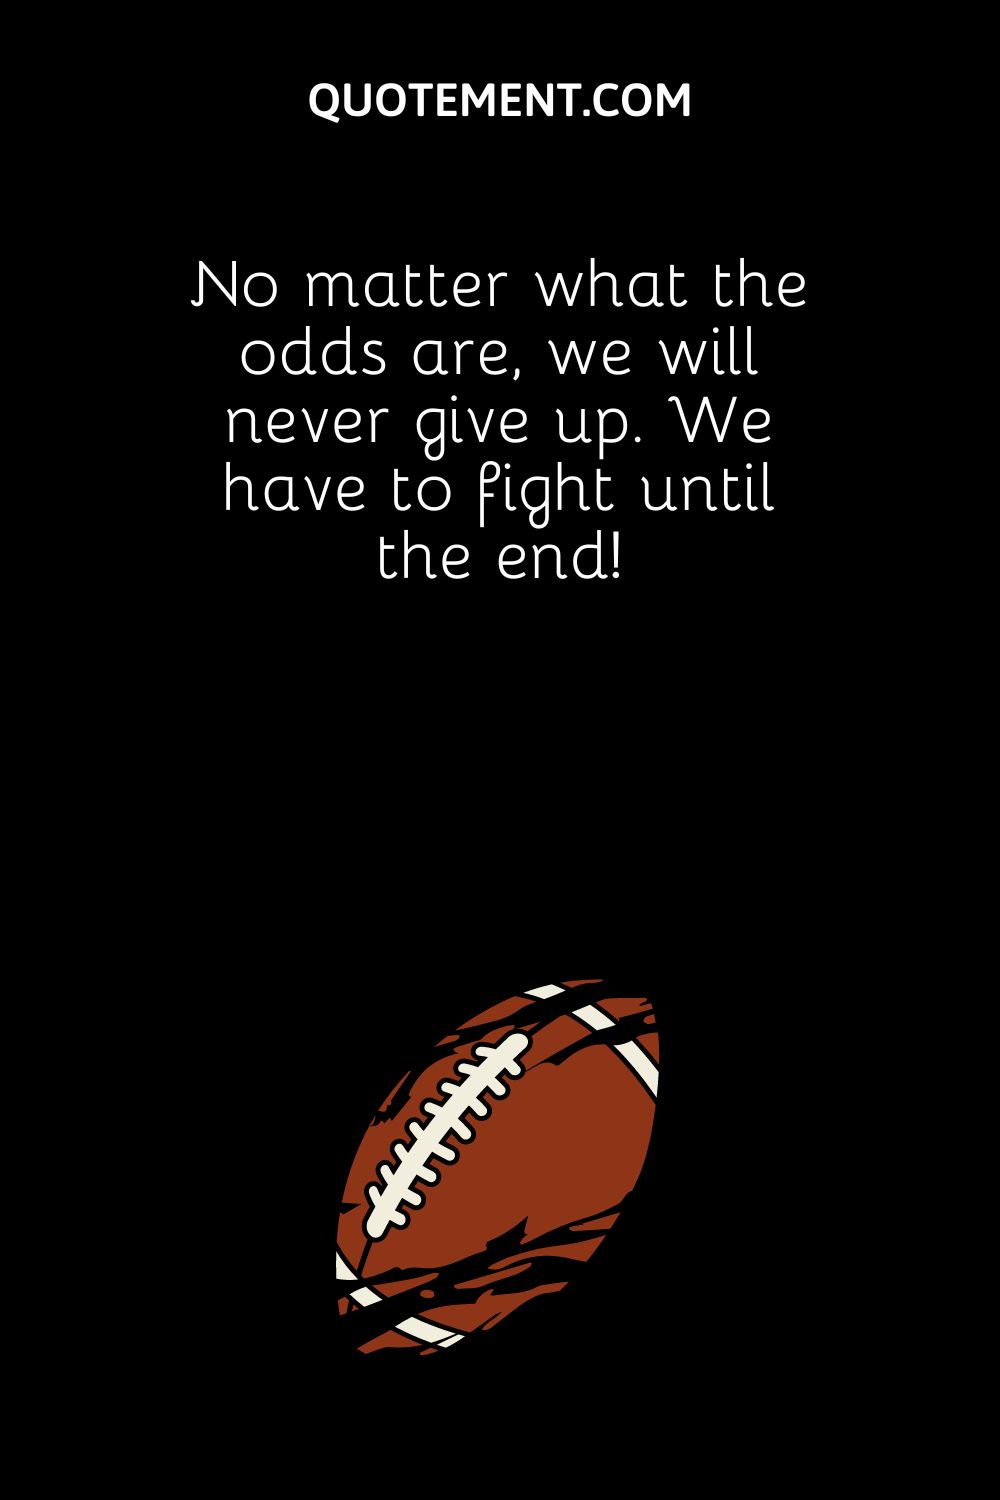 No matter what the odds are, we will never give up